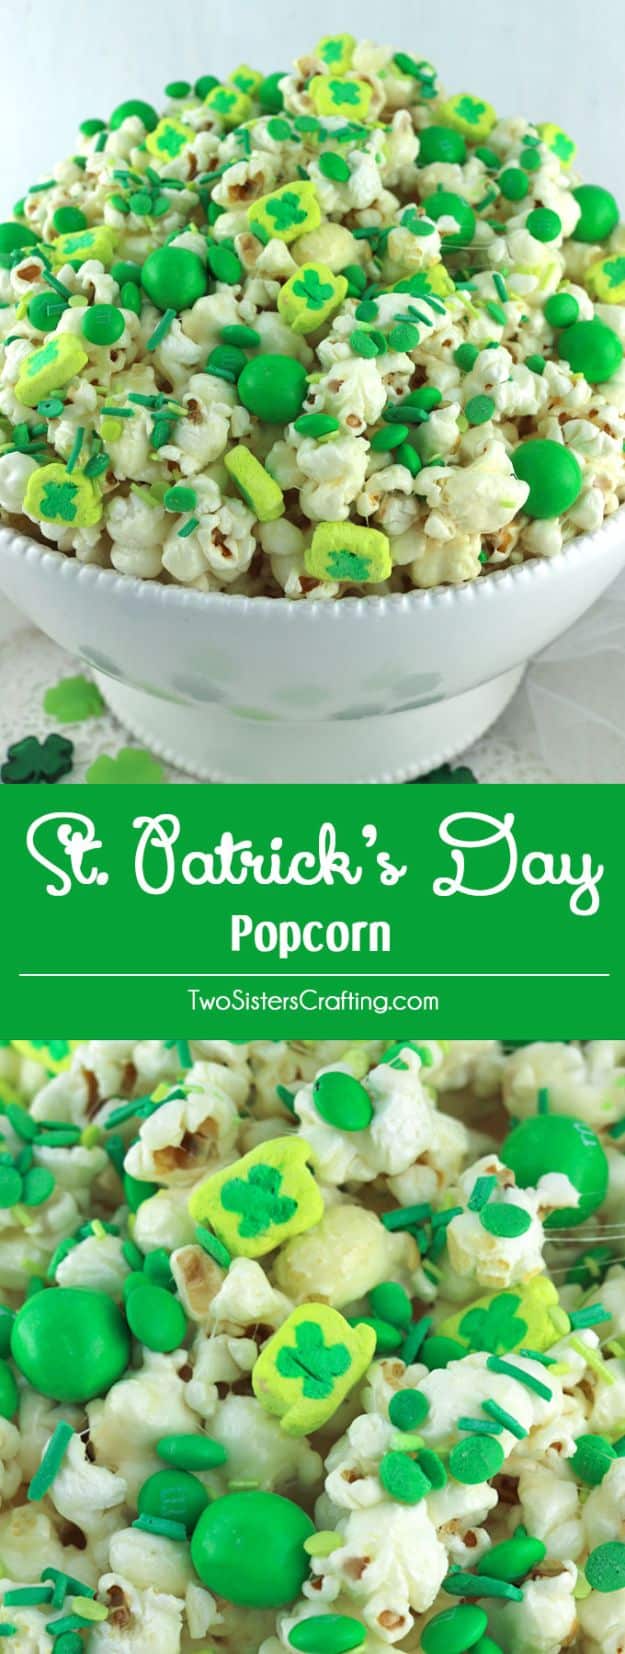 St Patrick's Day Food and Recipe Ideas - St. Patrick's Day Popcorn - DIY St. Patrick's Day Party Recipes for Dinner, Desserts, Cookies, Cakes, Snacks, Dips and Drinks - Green Shamrocks, Leprechauns and Cute Party Foods - Easy Appetizers and Healthy Treats for Adults and Kids To Make - Potluck, Crockpot, Traditional and Corned Beef http://diyjoy.com/st-patricks-day-recipes